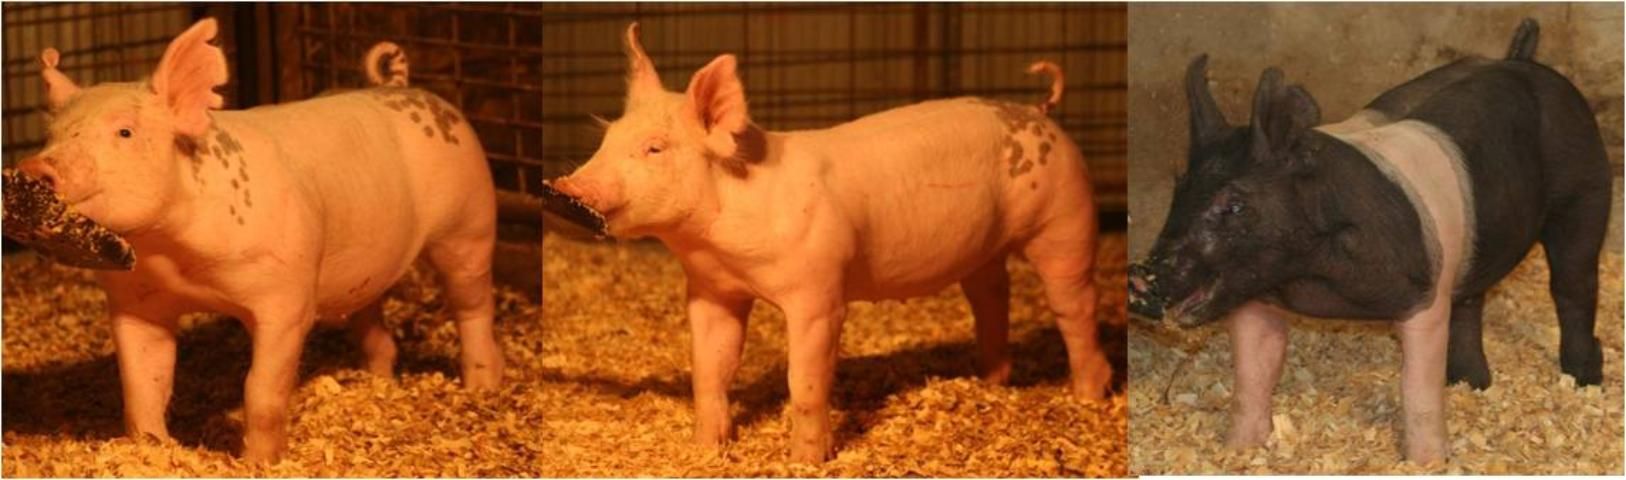 Figure 6. From left to right: a pig with secondary indicators of growth that suggest he should be a nice project; a low-volumed gilt that will likely remain lean to a heavy weight and will likely be too slow-growing; and a wide-chested, big-bodied barrow on the right that will likely have too much 10th rib fat thickness by 280 lbs.